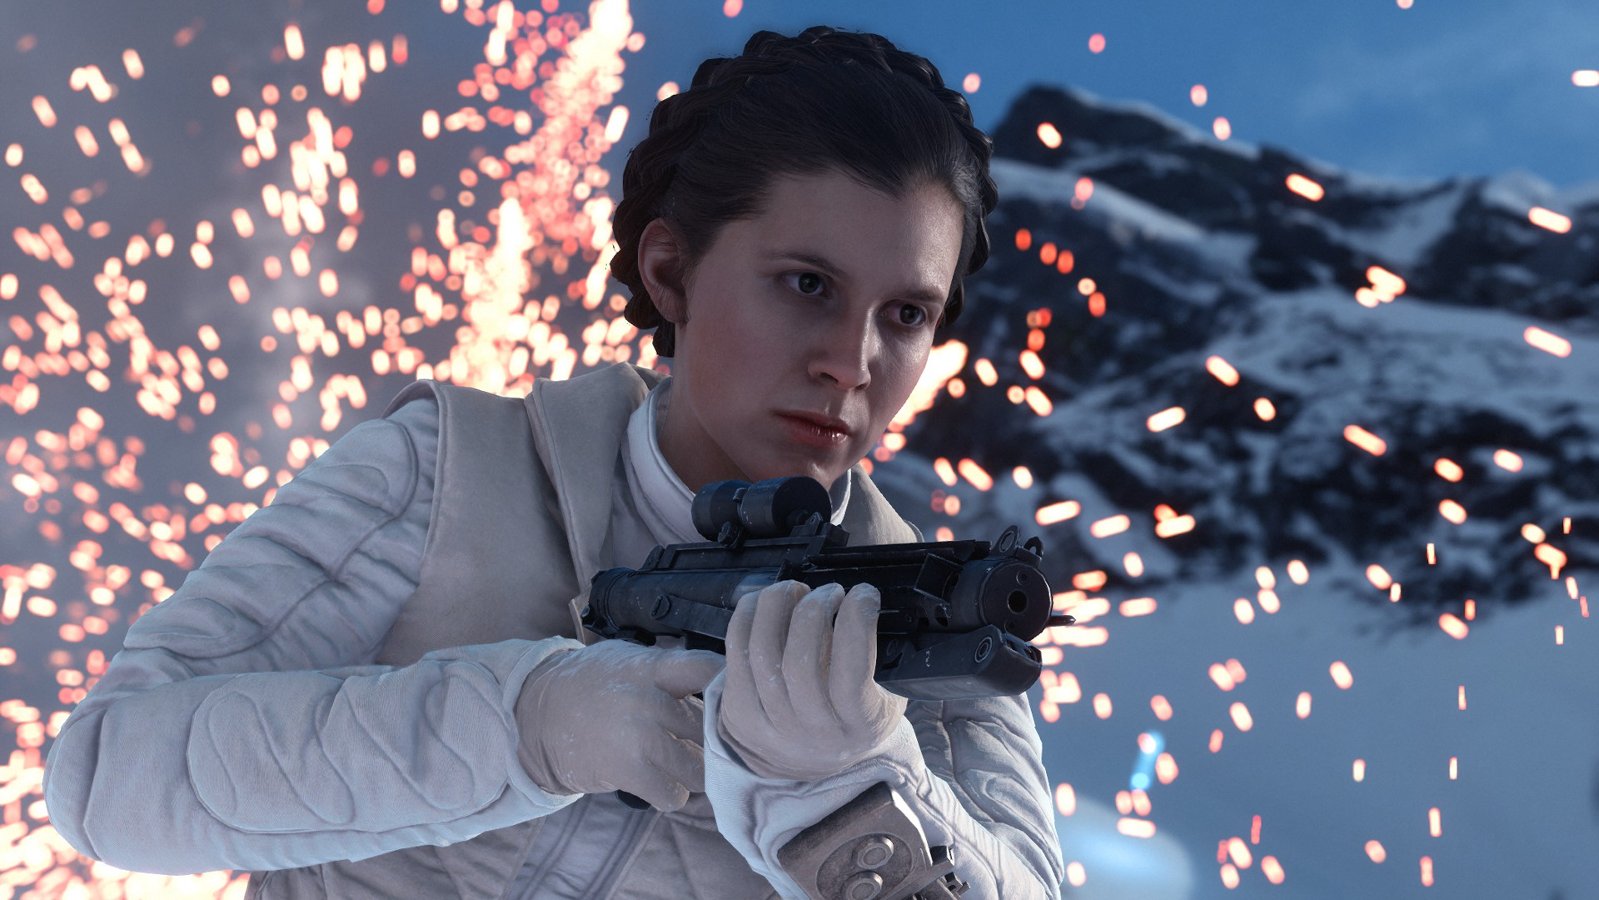 Leia on Hoth in Battlefront.